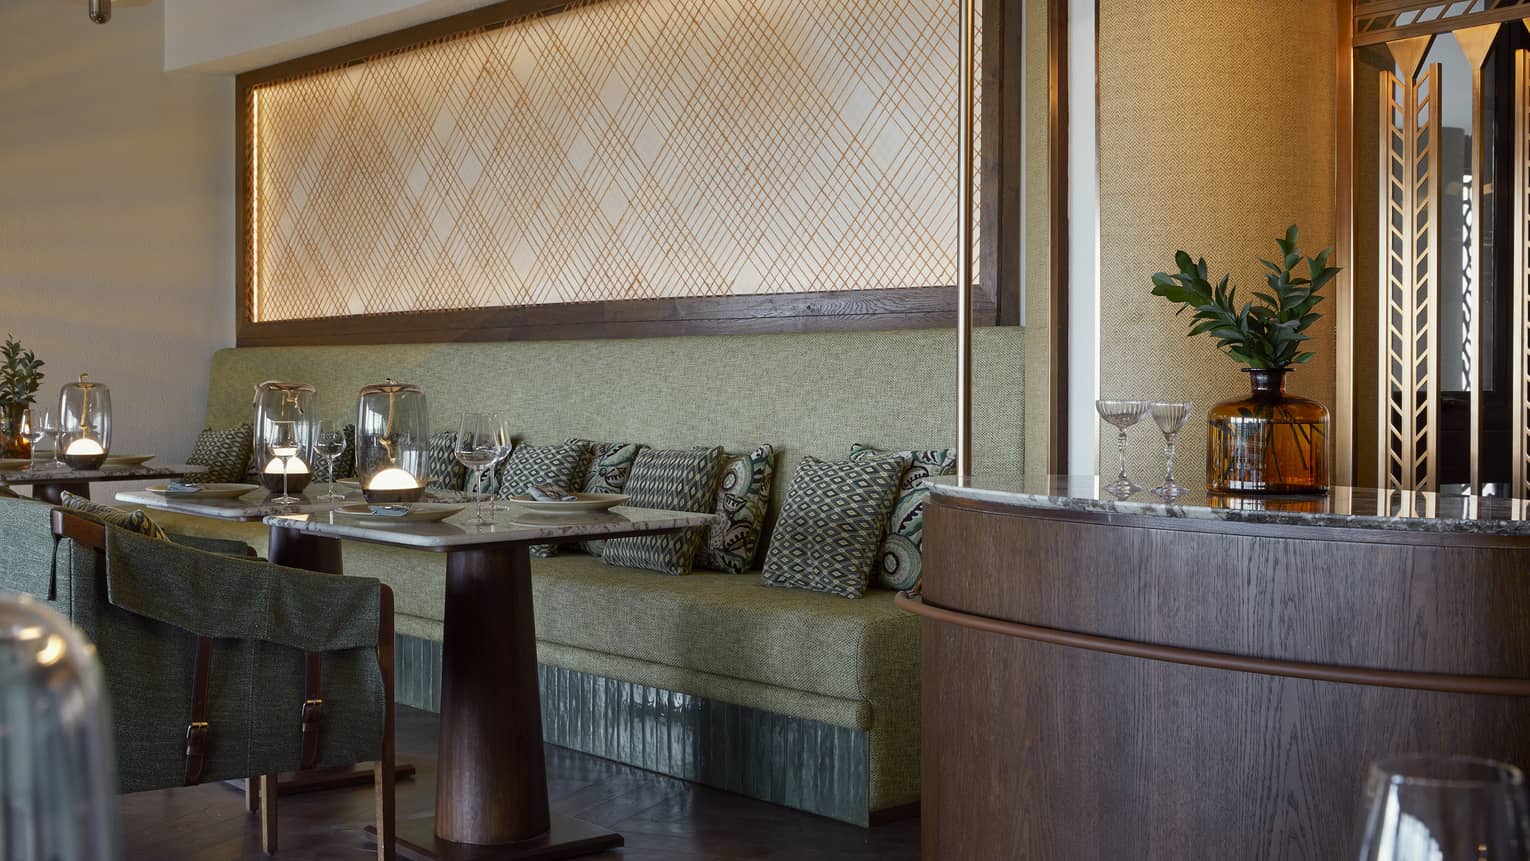 Olive green banquette seating in contemporary restaurant